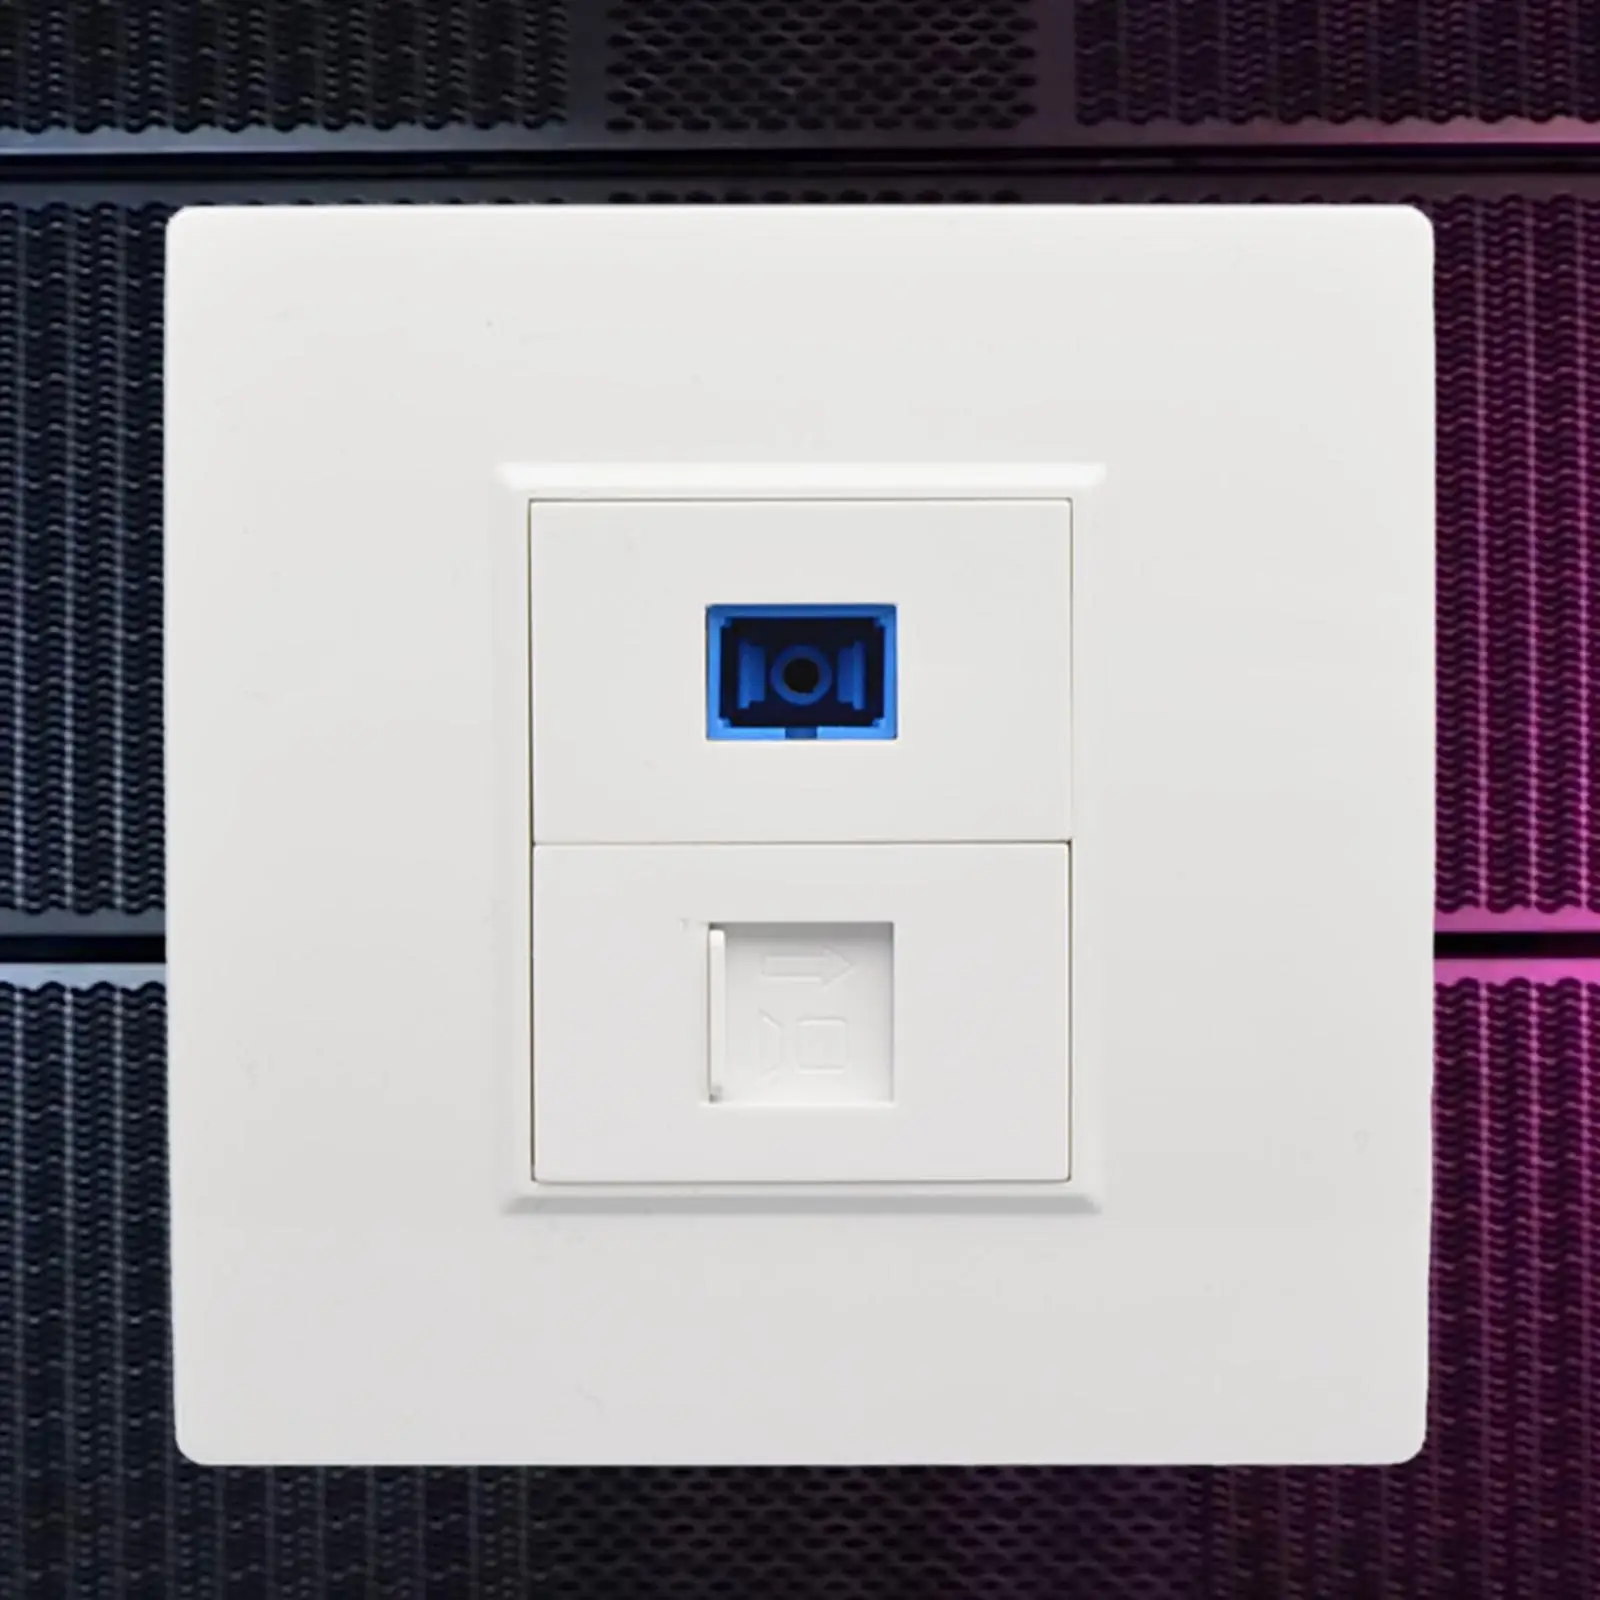 Network Wall Plate Outlet Devices Optical Interface for Cable Installation Computer